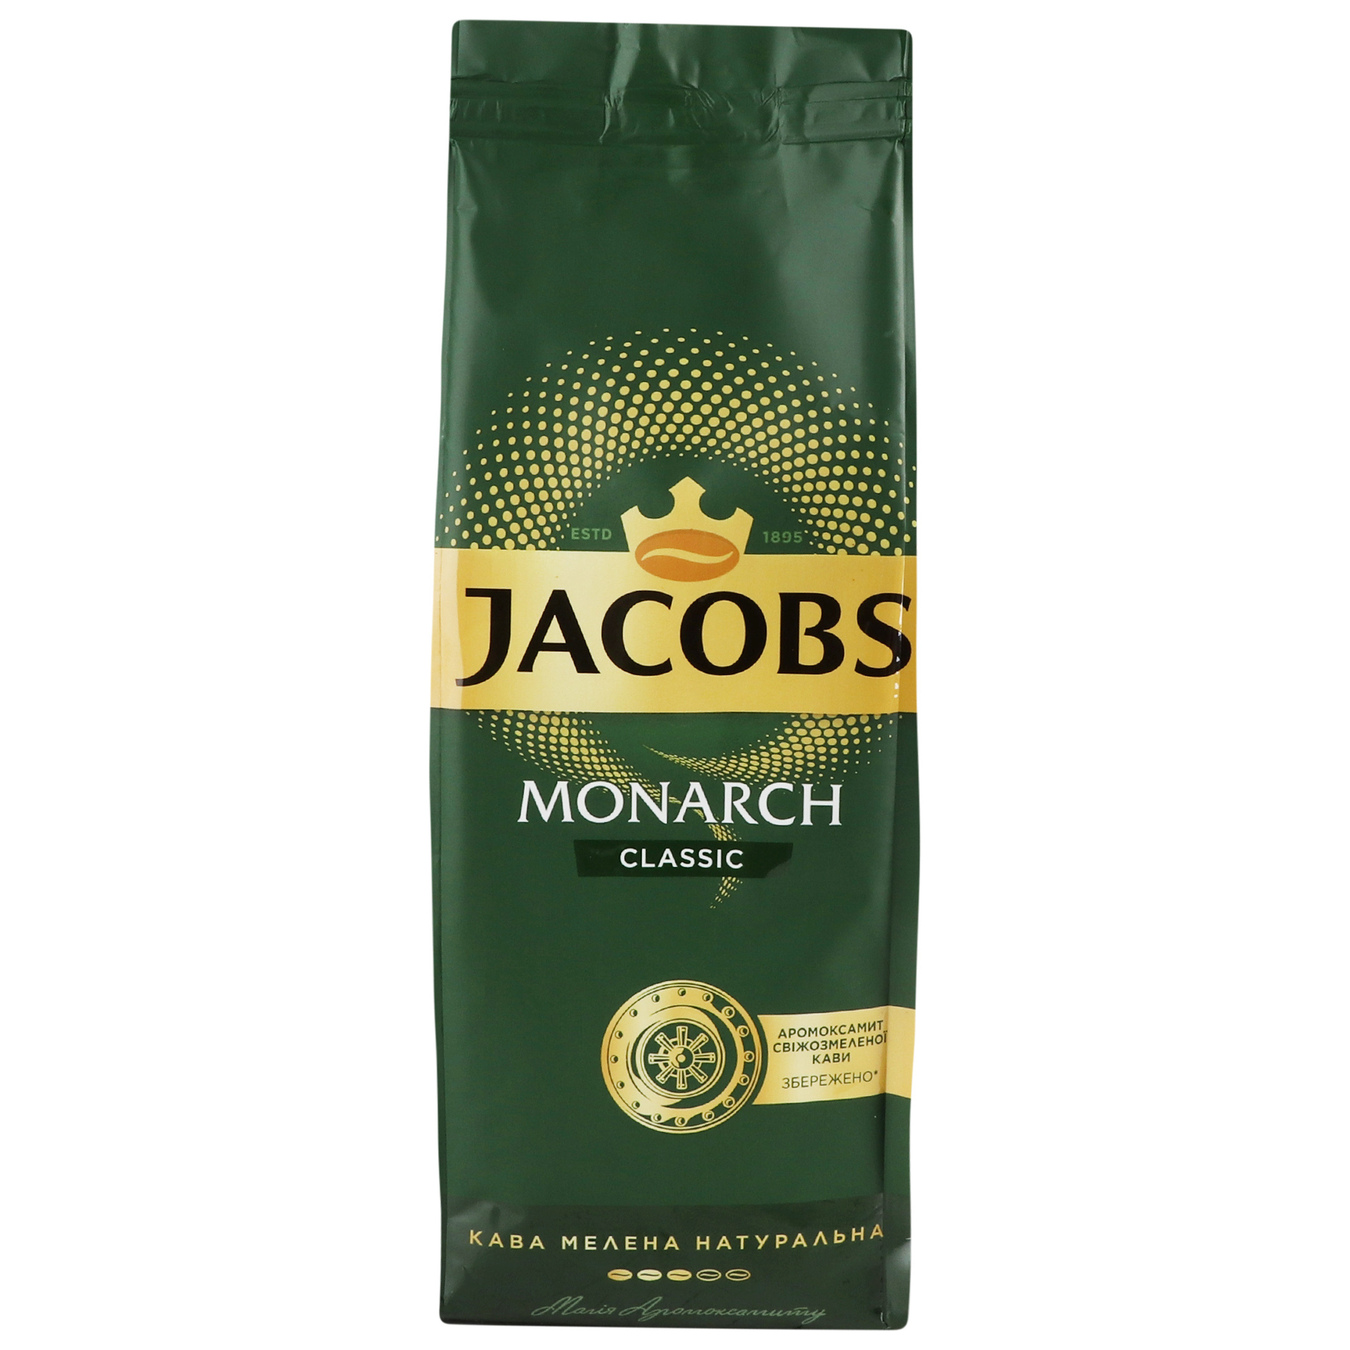 JACOBS MONARCH CLASSIC natural roasted ground coffee 200g